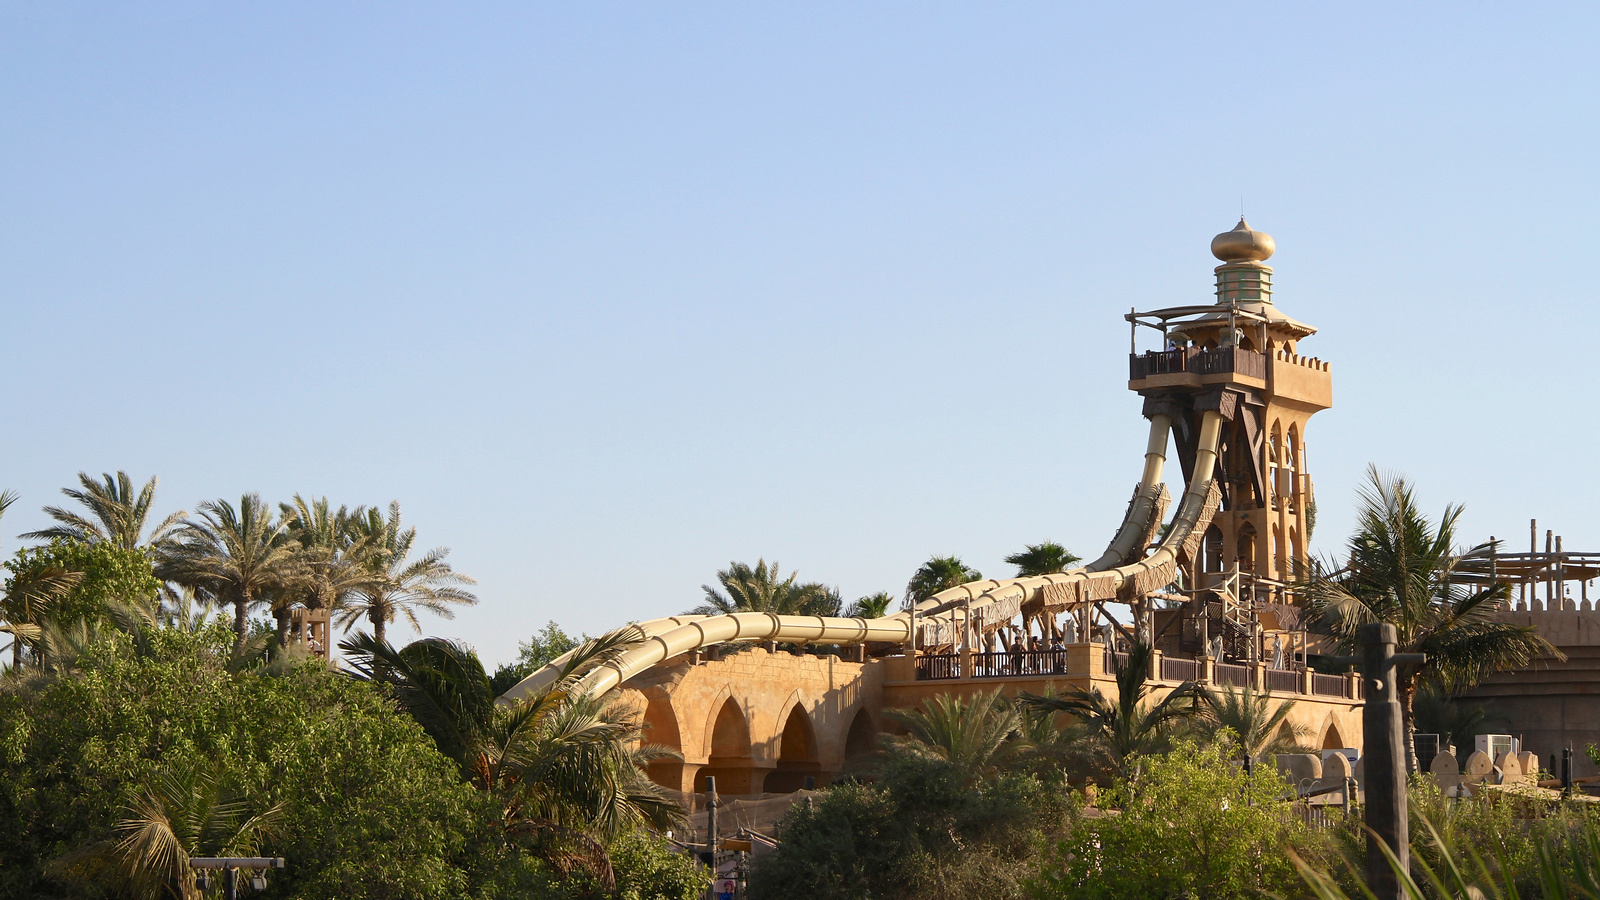 #15. Jumeirah Sceirah, Dubai - The World’s 25 Scariest Waterslides… I’m Surprised #6 Is Even Legal.